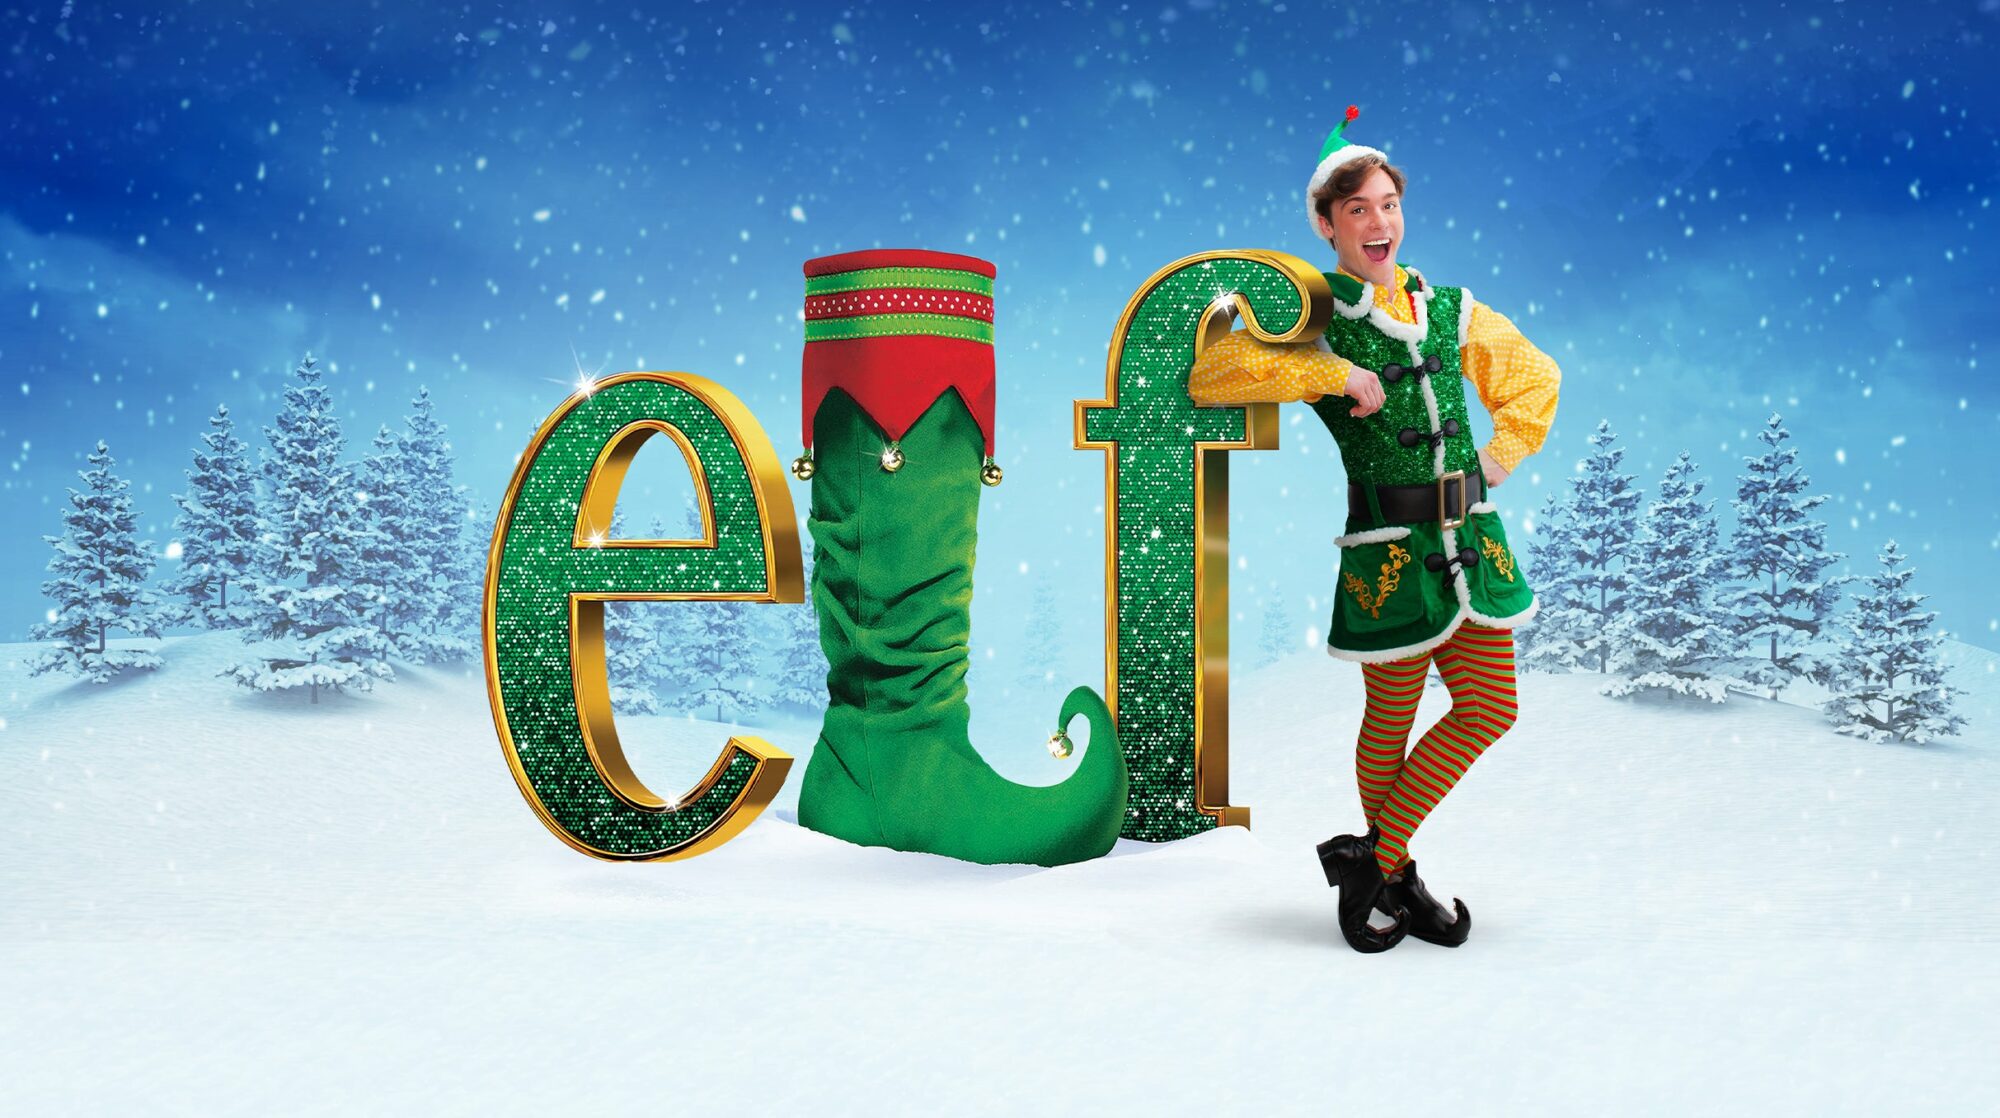 Image name Elf the Musical at First Direct Arena Leeds the 7 image from the post Events in Yorkshire.com.